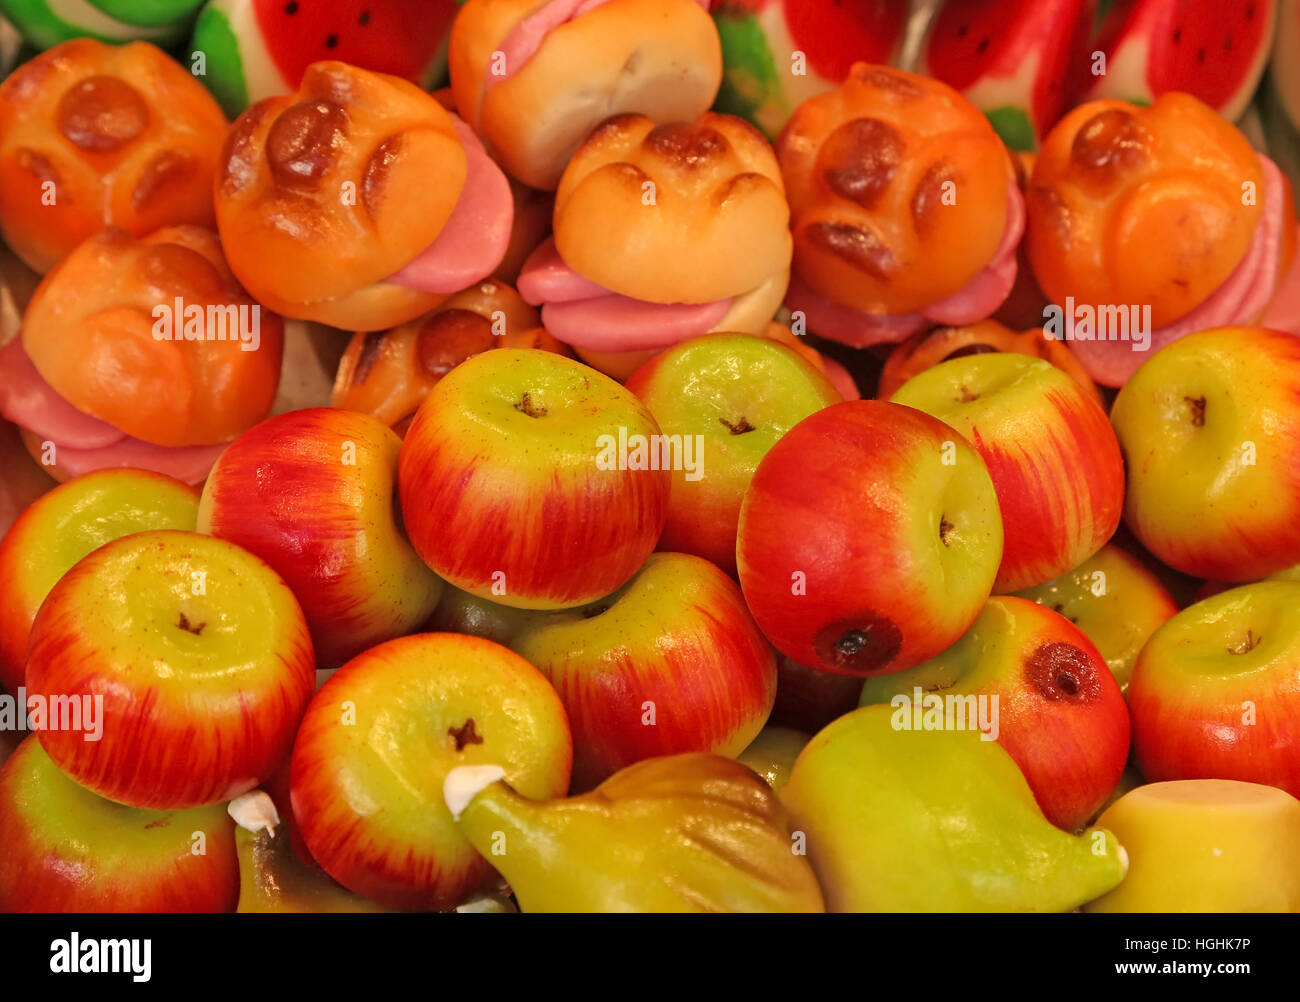 marzipan sweets that look like fruits for sale at market Stock Photo